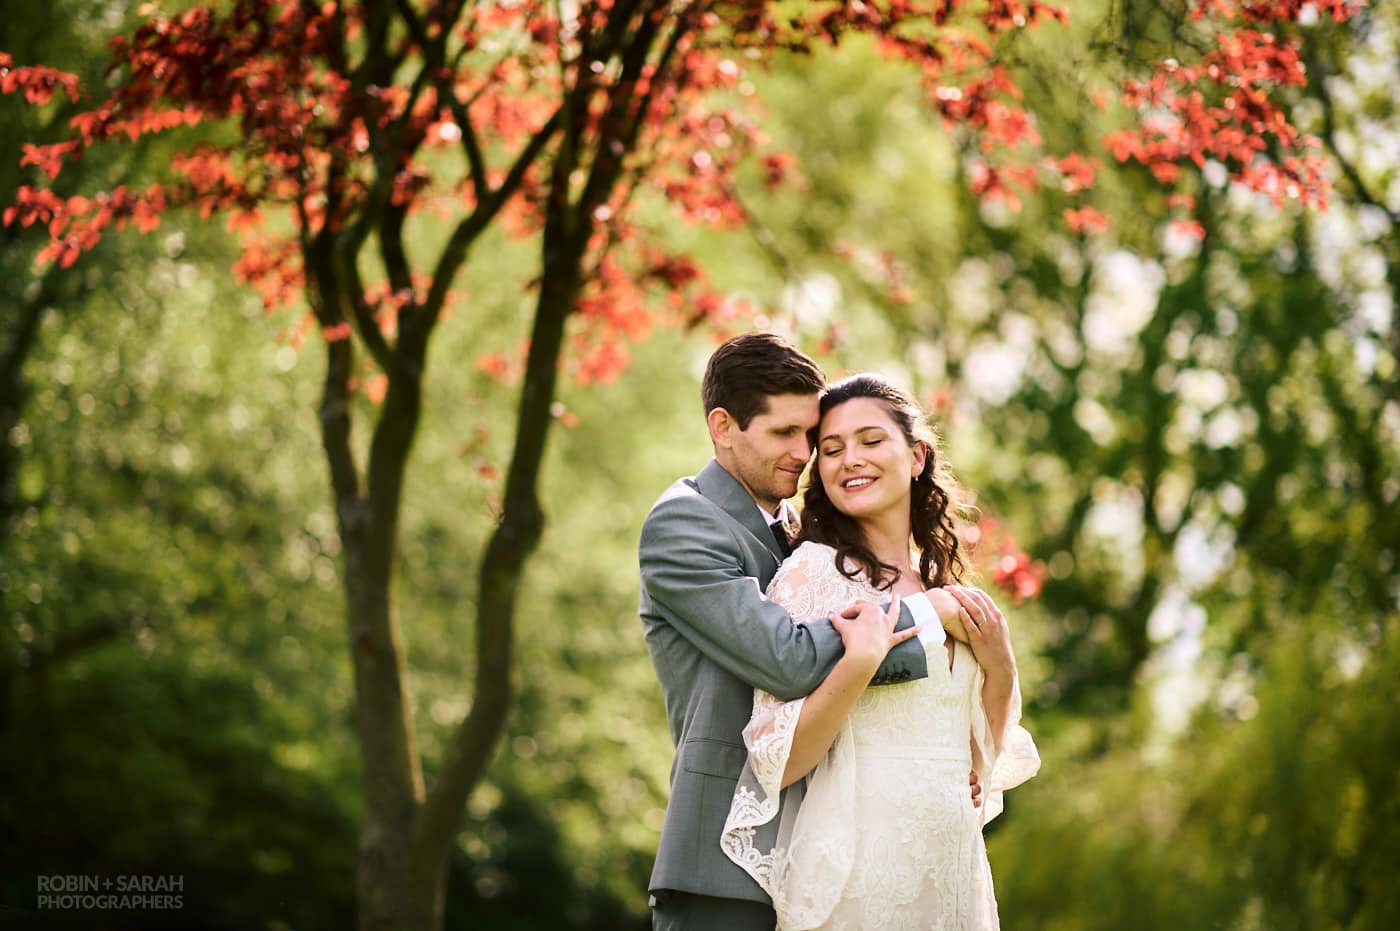 Groom holds bride as they share a quiet moment during garden wedding, with beautiful red tree in background